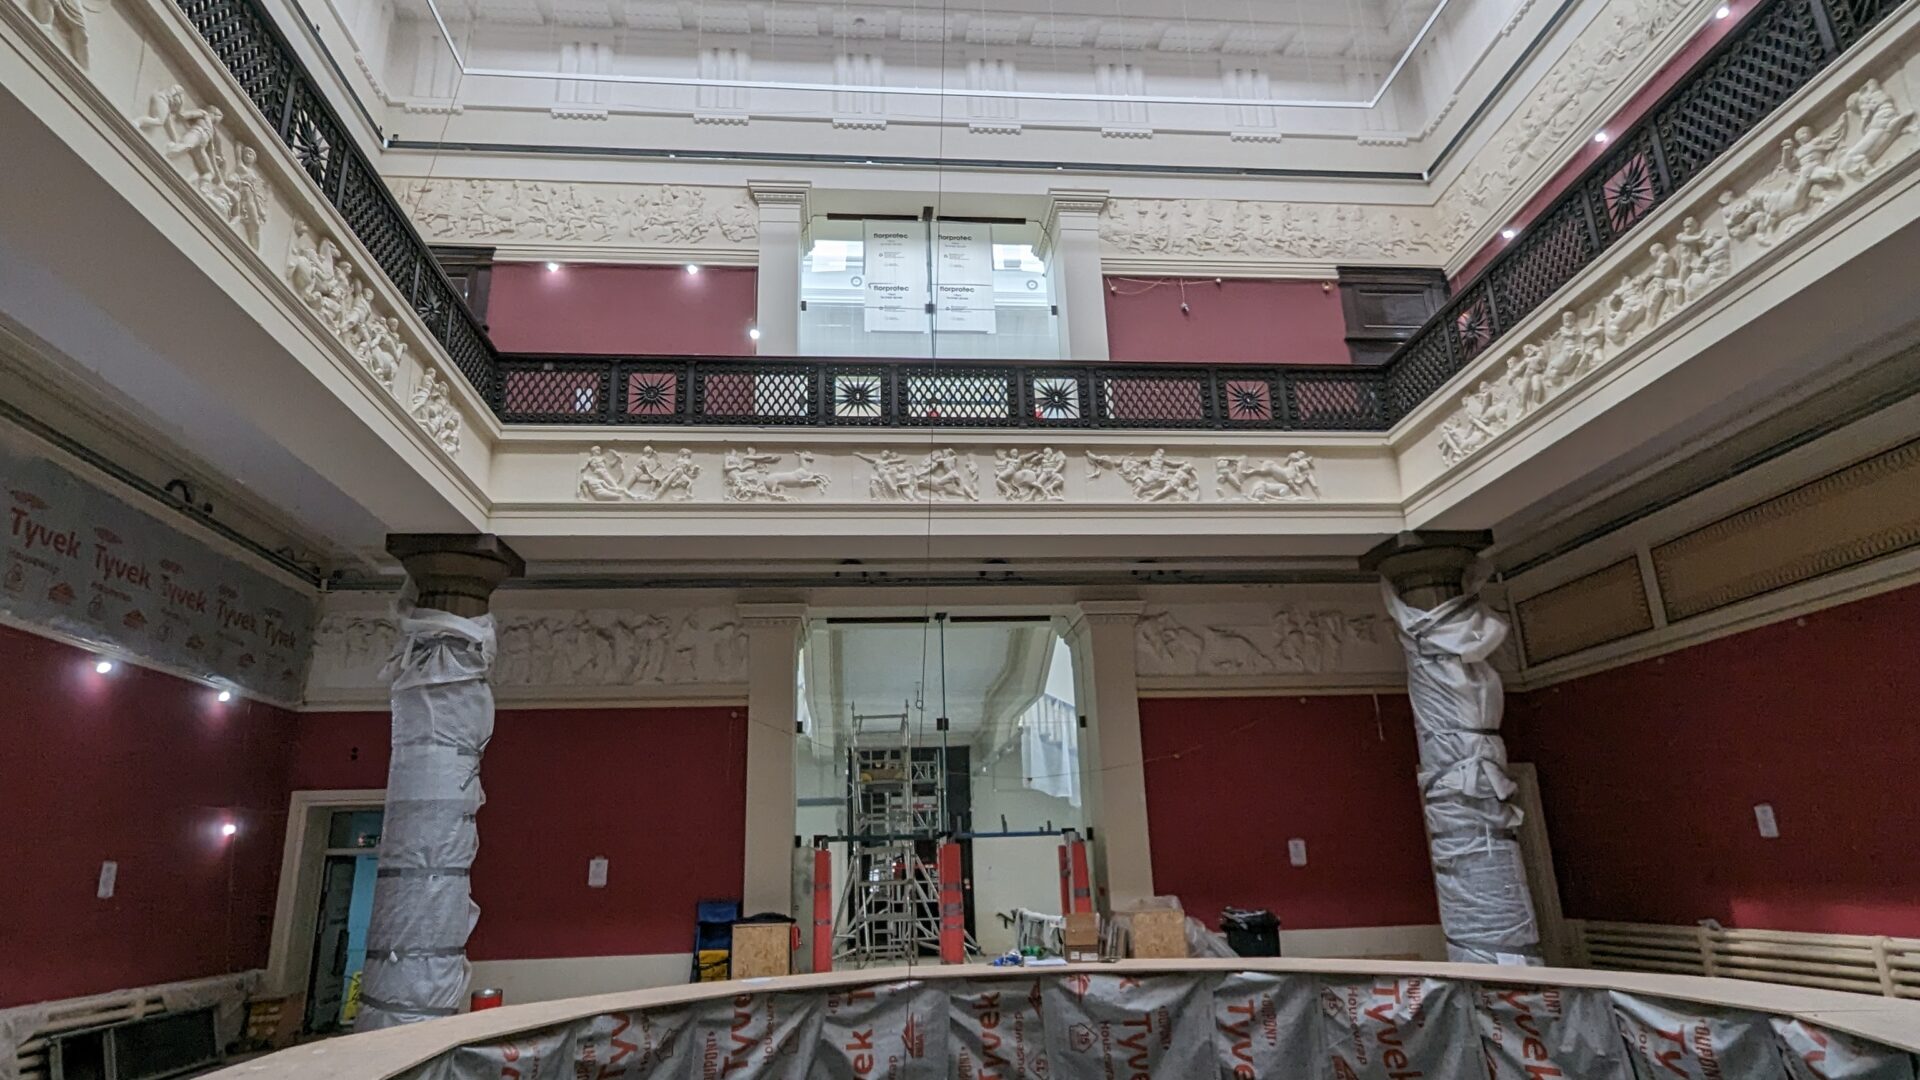 Image taken from the second floor balcony of The Harris.